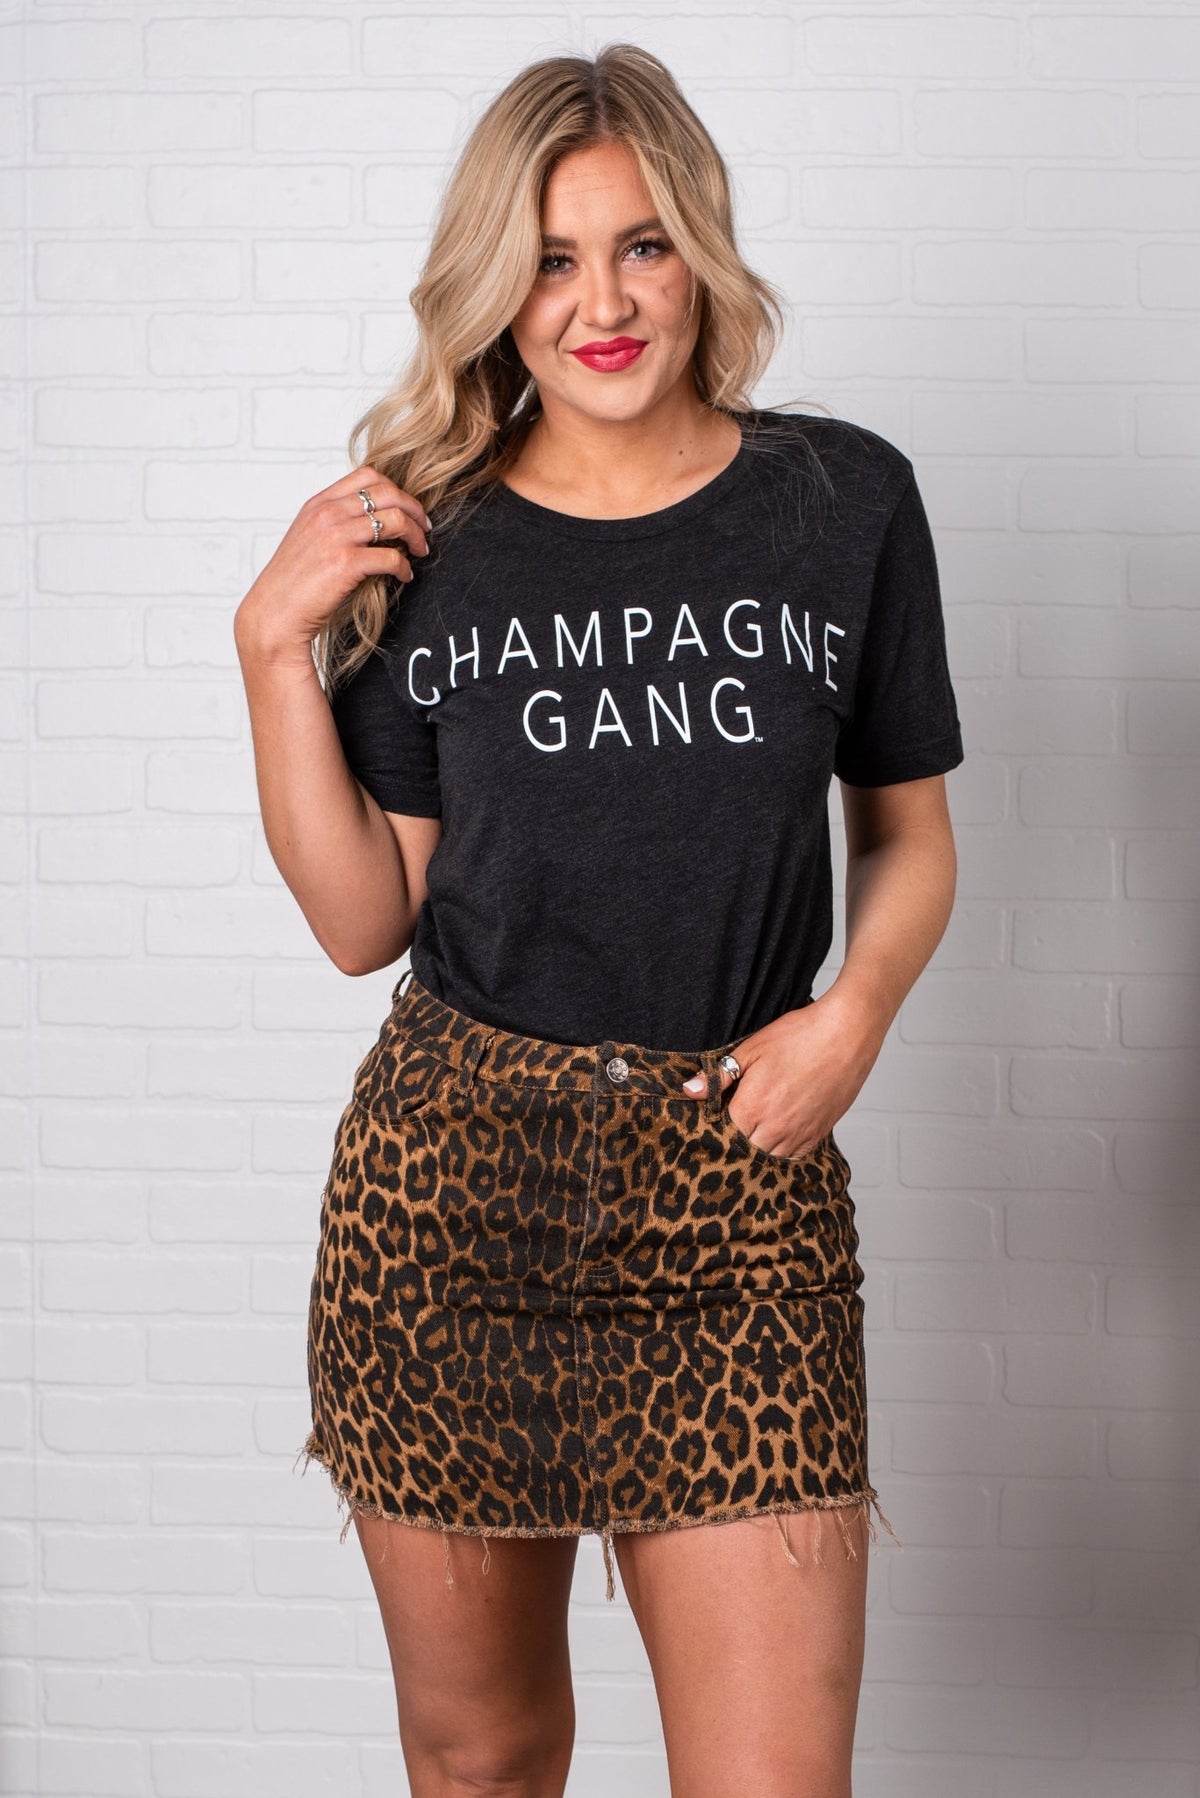 Champagne Gang unisex short sleeve t-shirt charcoal - Stylish T-shirts - Trendy Graphic T-Shirts and Tank Tops at Lush Fashion Lounge Boutique in Oklahoma City